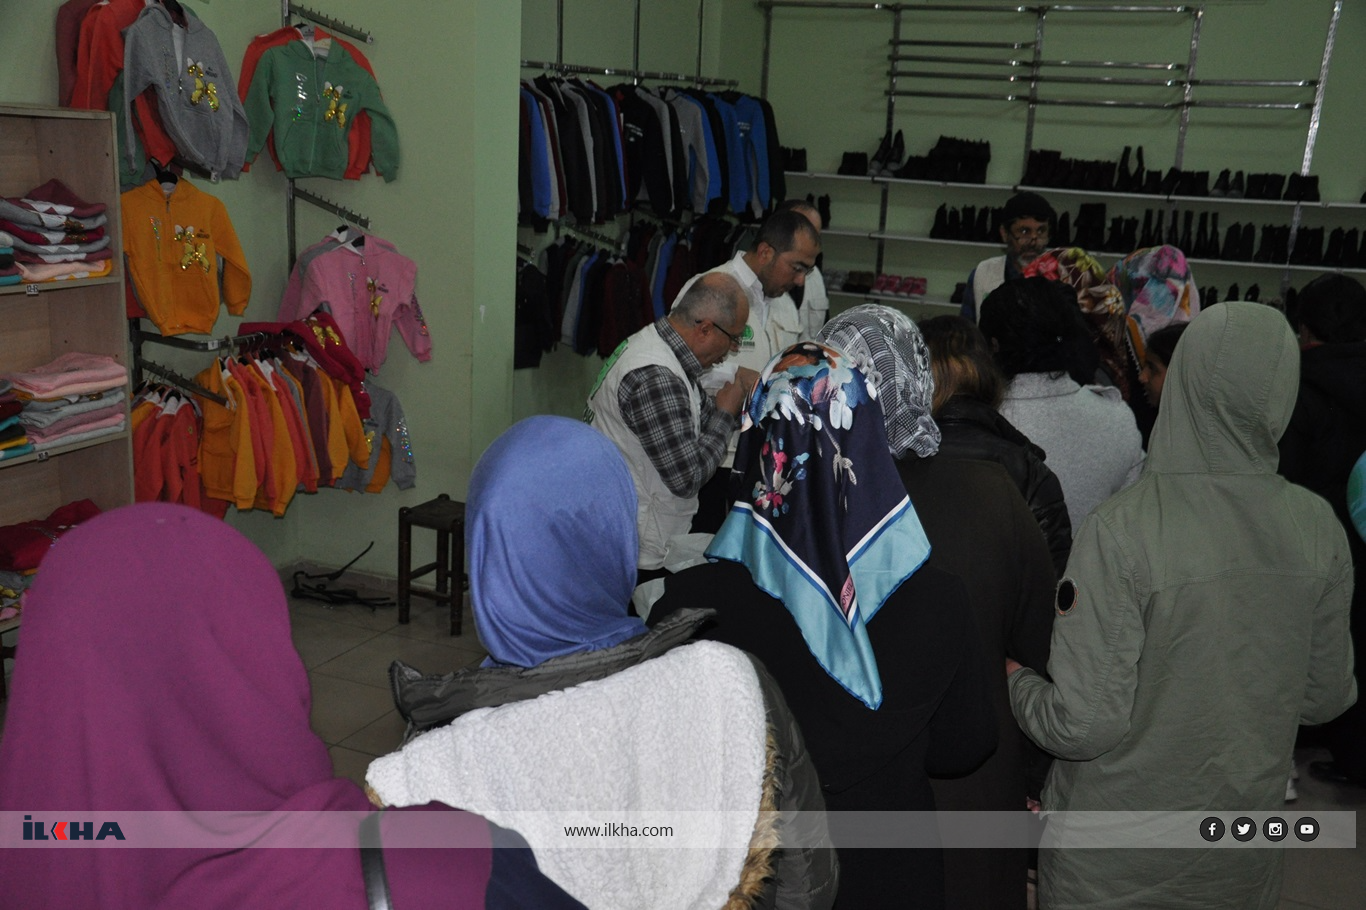 Hope Caravan provides clothing aid to disadvantaged children in southeastern Turkey